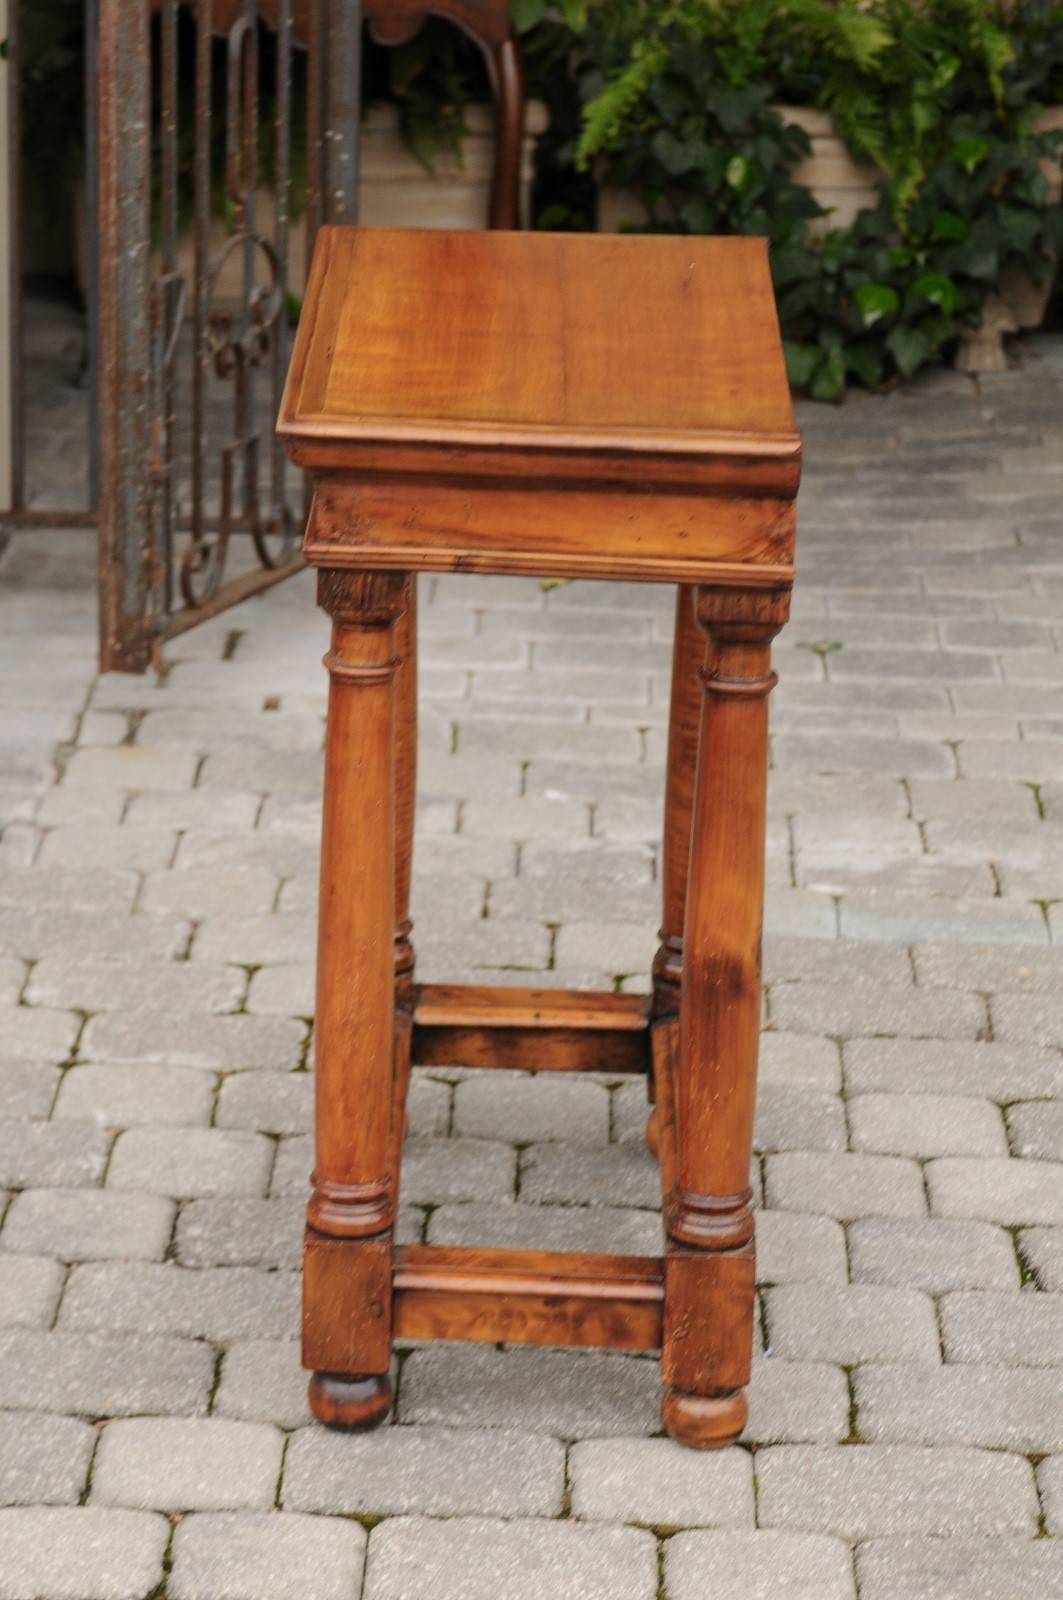 French Empire Style Mid-19th Century Fruitwood Side Table with Doric Column Legs For Sale 4